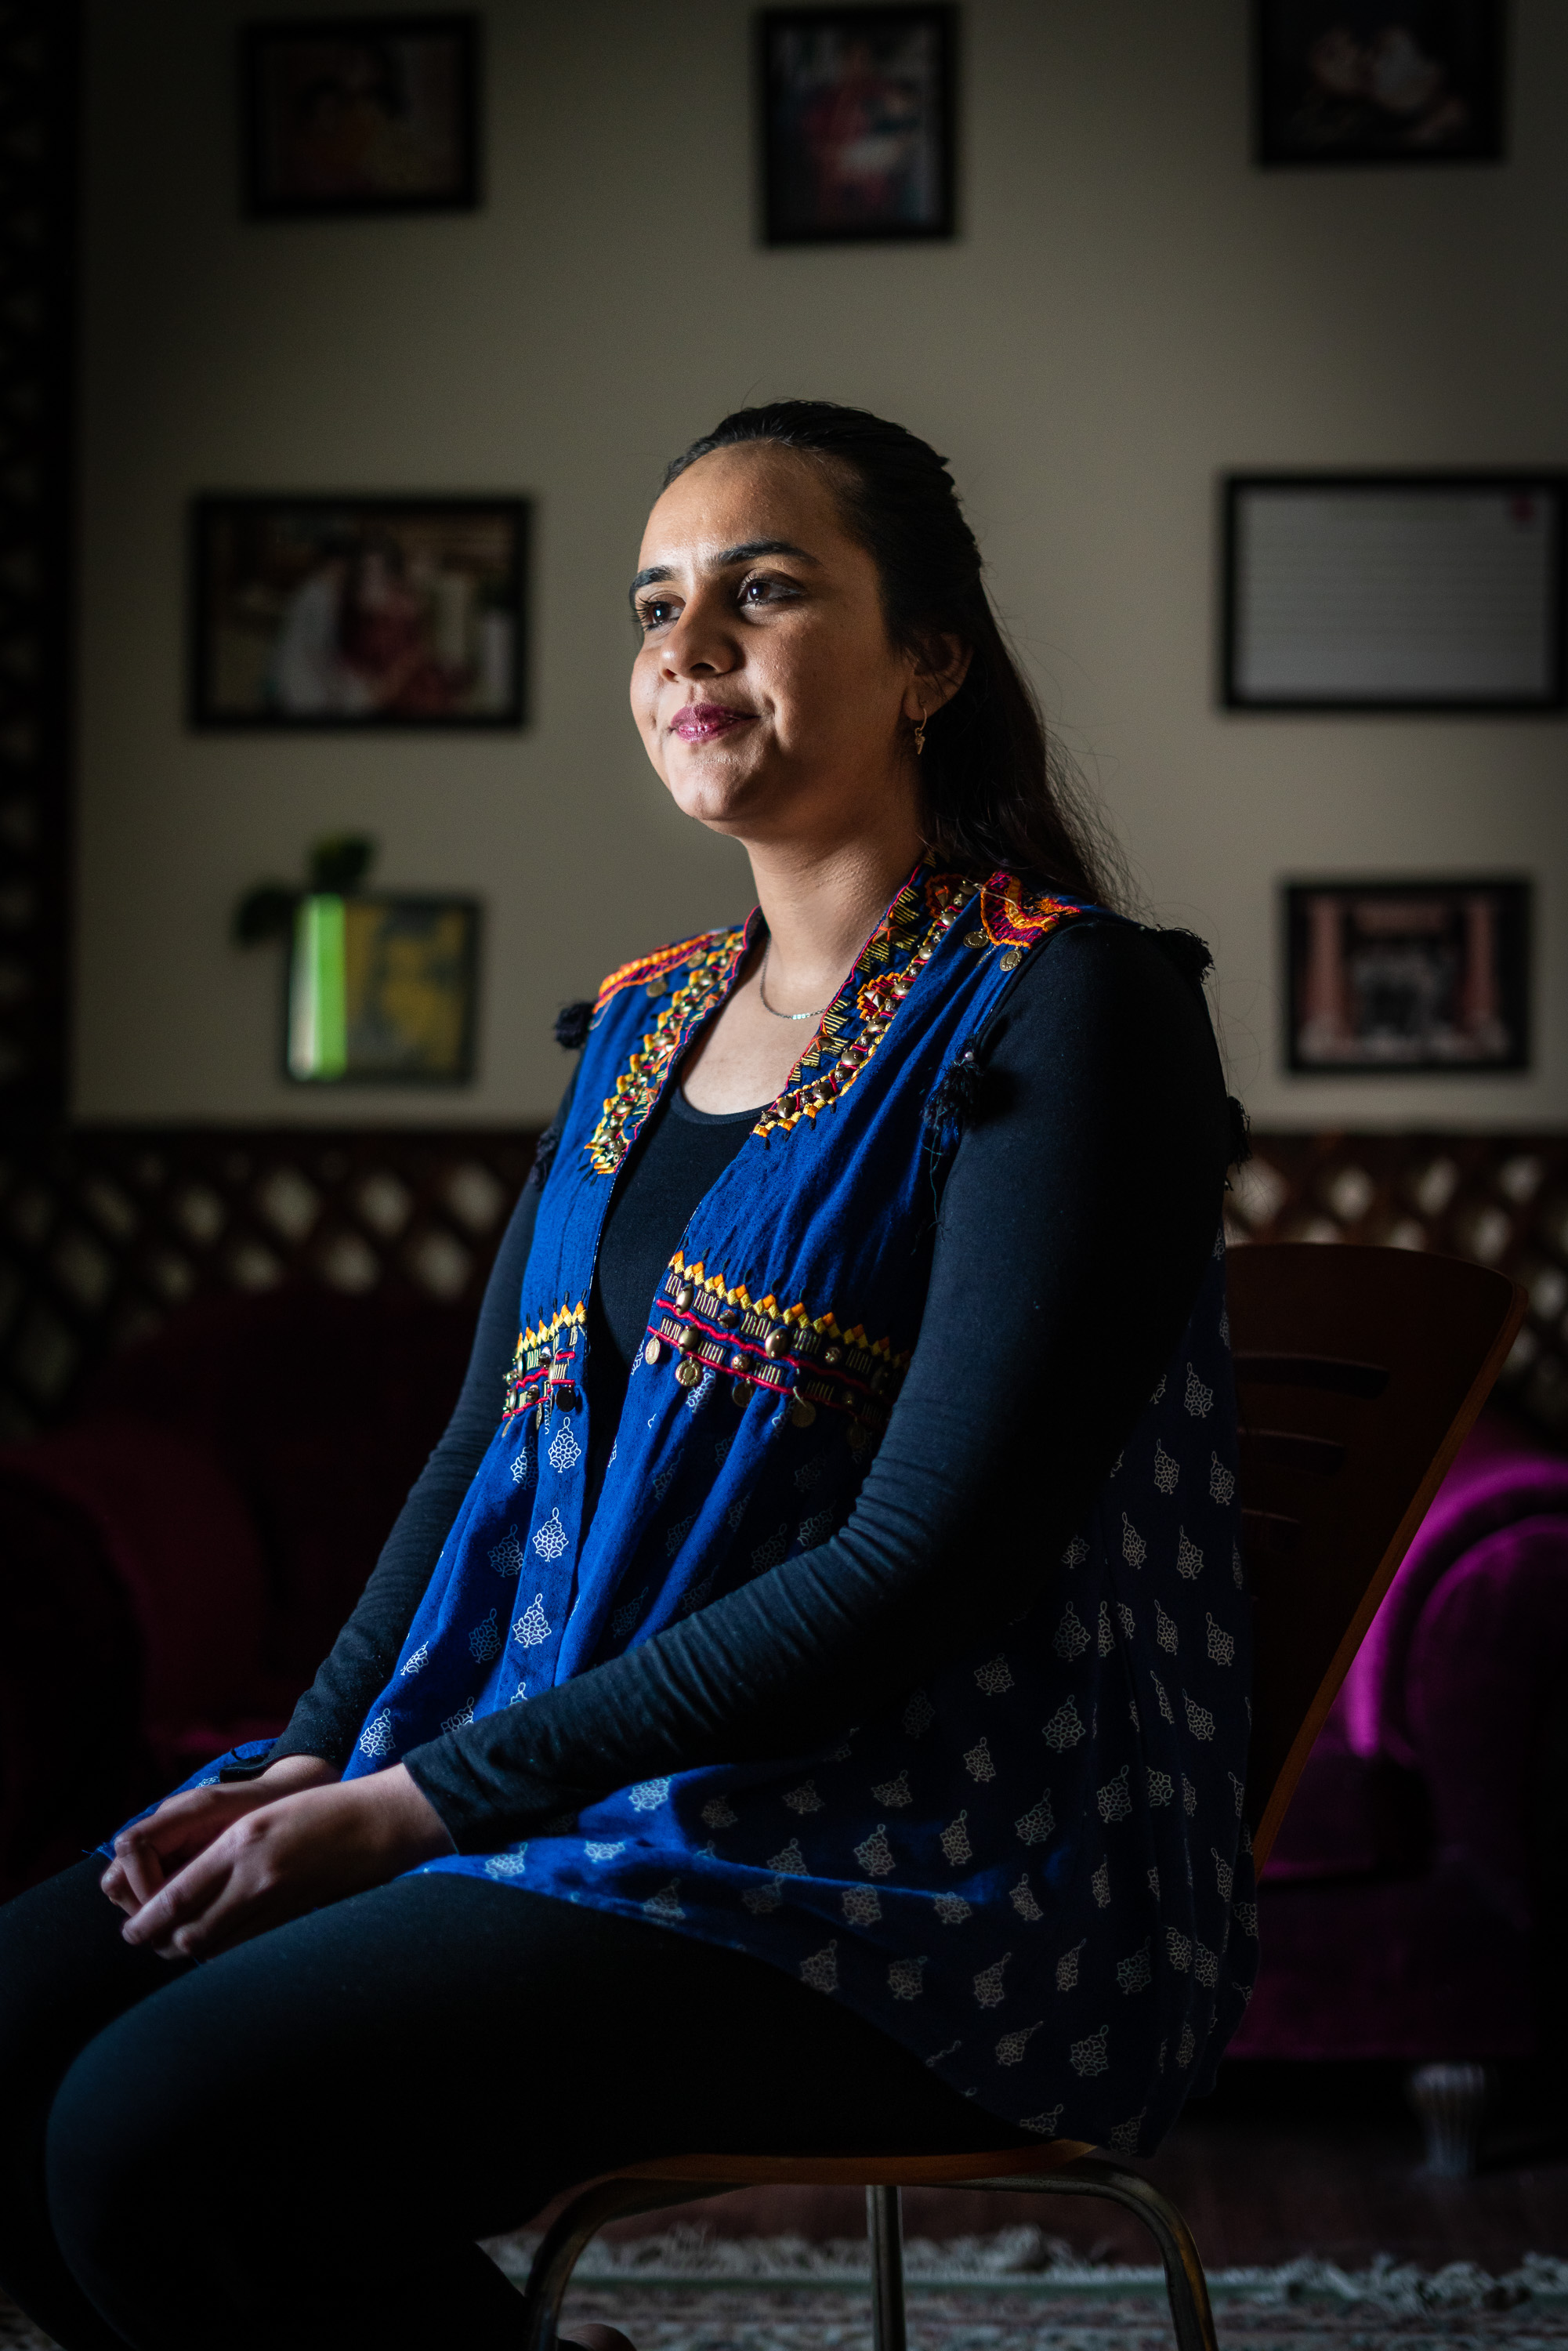 Zenith Irfan poses for a photo at her home in Lahore, Pakistan (photo: Philipp Breu)